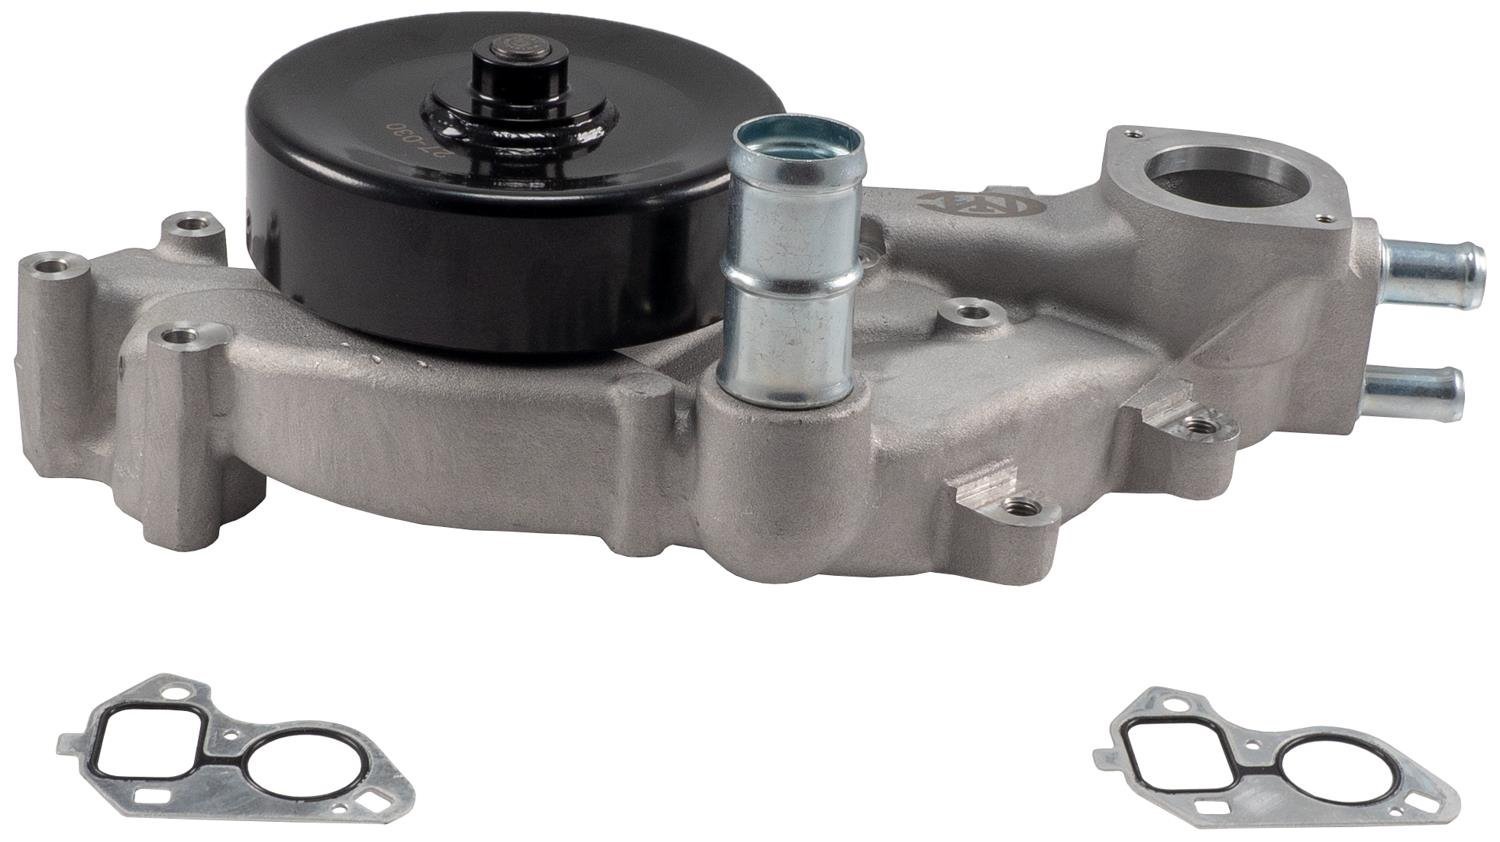 Water Pump Fits Select 2004-2009 GM CTS, Corvette, G8 5.7/6.0/6.2/7.0L Engines